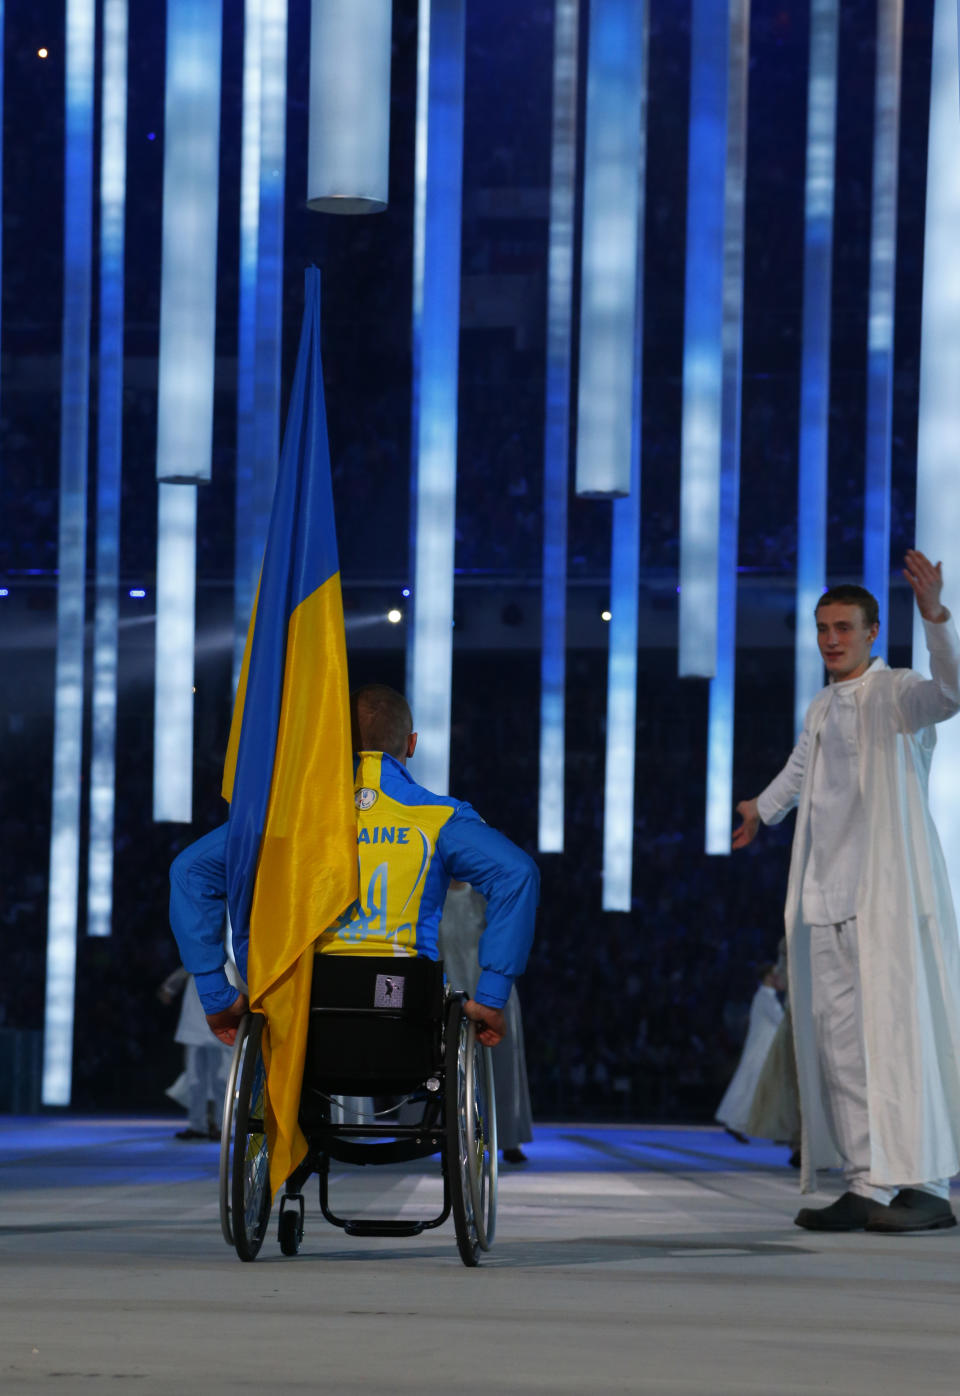 CAPTION ADDS NAME OF ATHLETE - Biathelete Mykhaylo Tkachenko, representing Ukraine, enters the arena during the opening ceremony of the 2014 Winter Paralympics at the Fisht Olympic stadium in Sochi, Russia, Friday, March 7, 2014. (AP Photo/Dmitry Lovetsky)